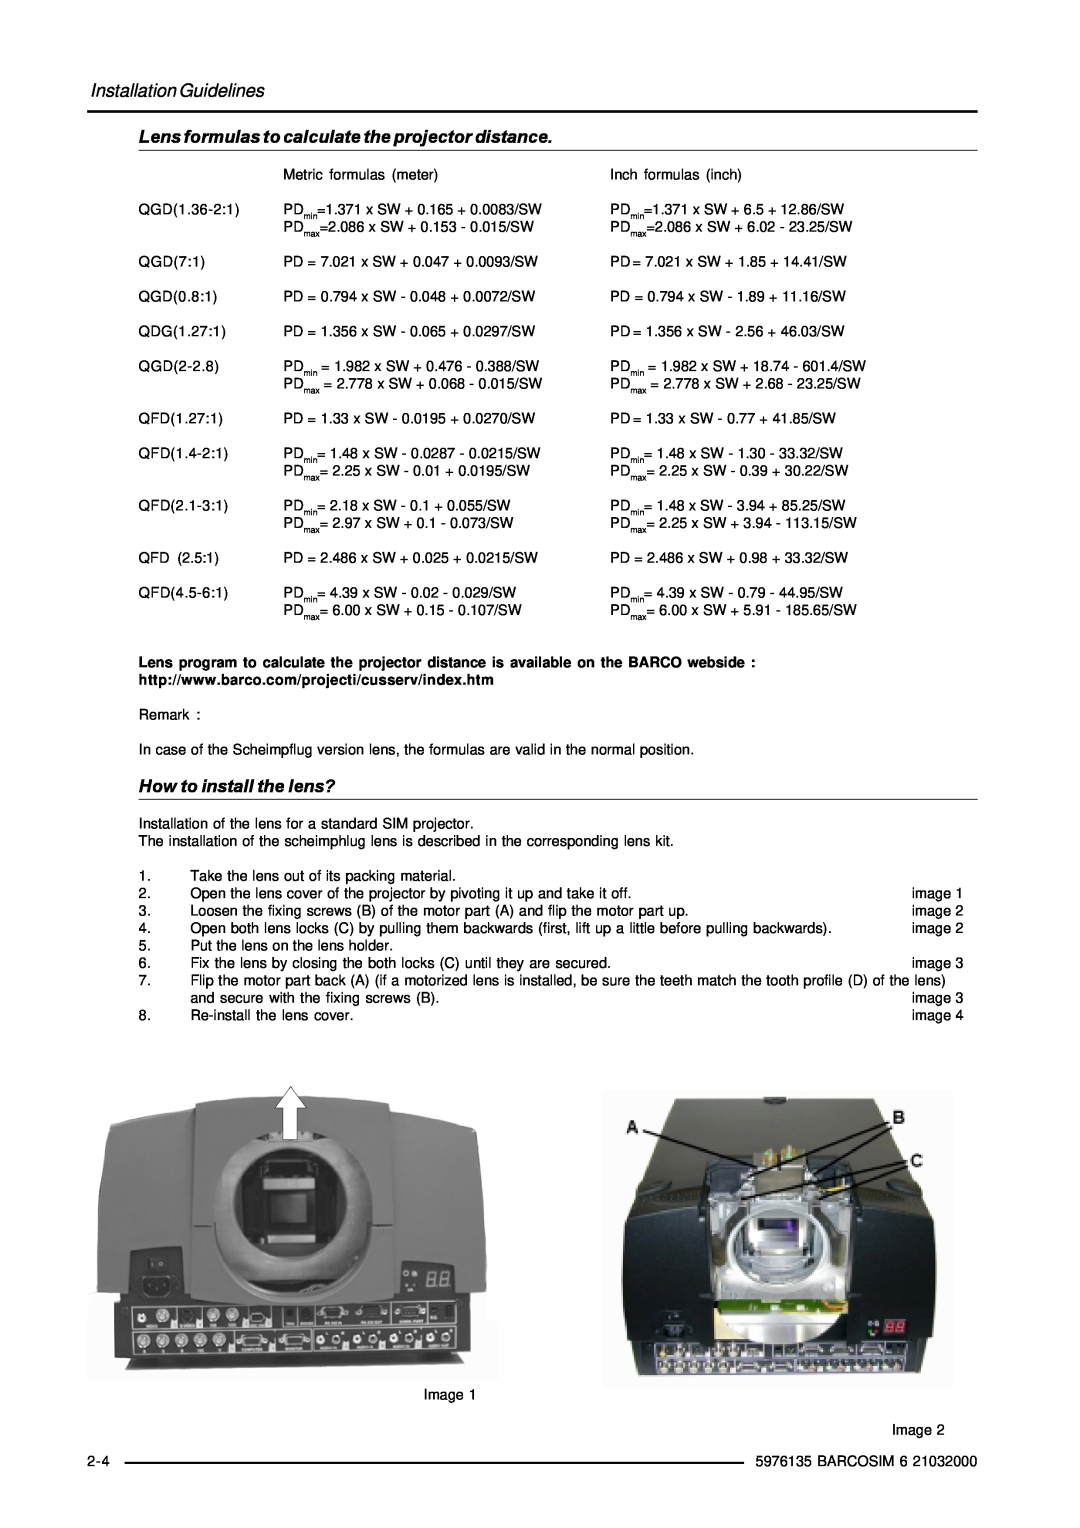 Barco R9040101 Lens formulas to calculate the projector distance, How to install the lens?, Installation Guidelines 